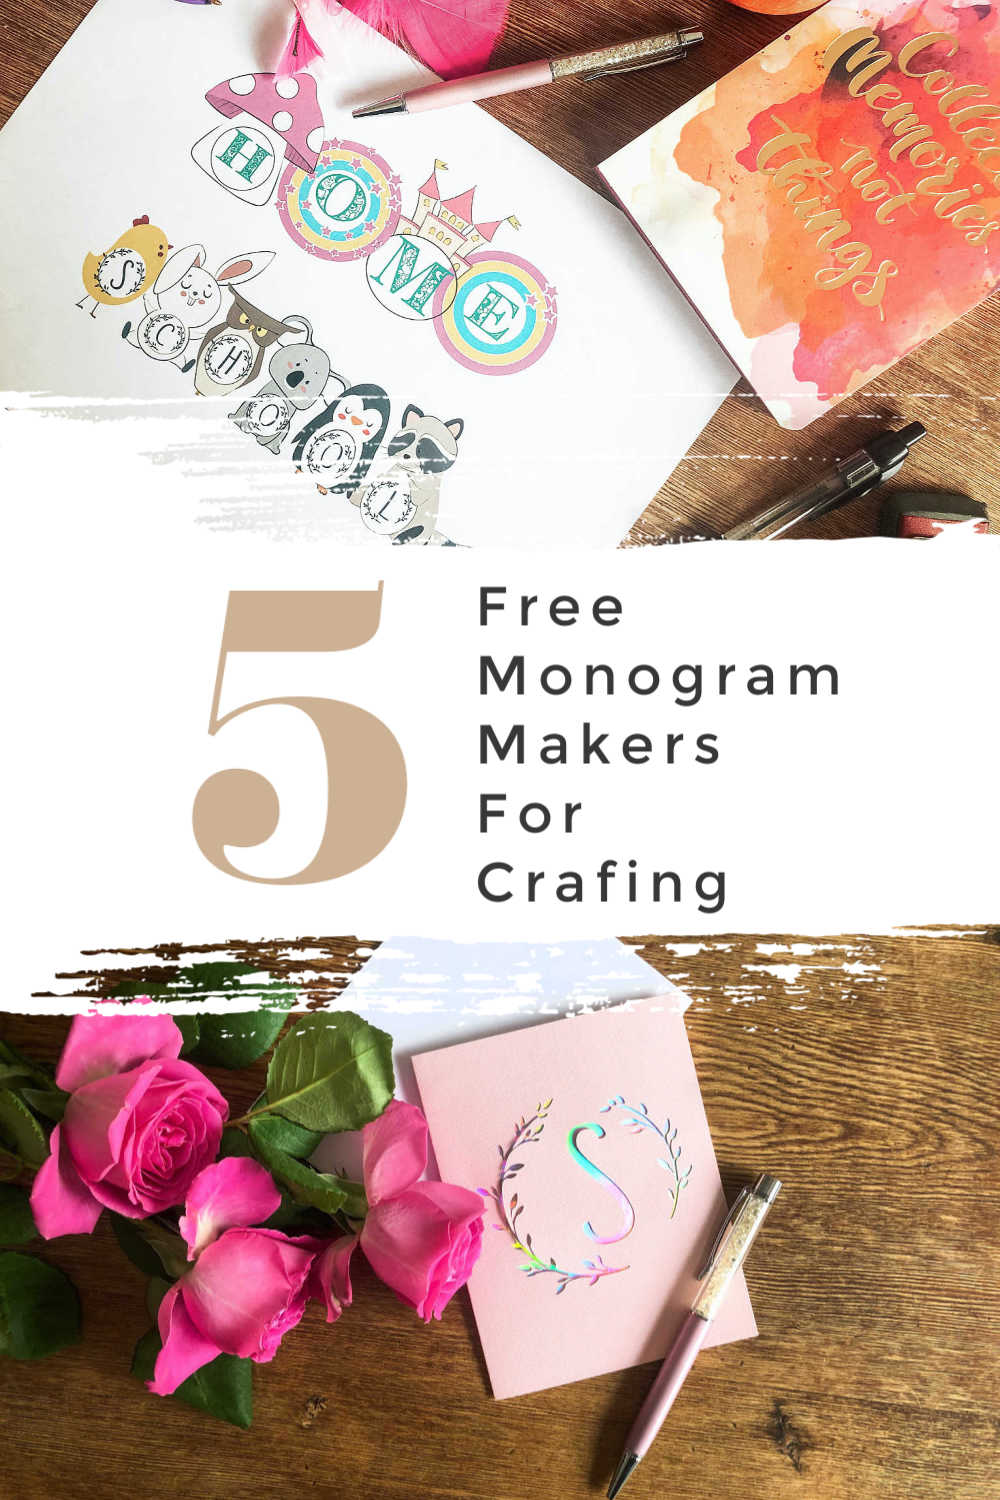 5 free monogram makers for crafting